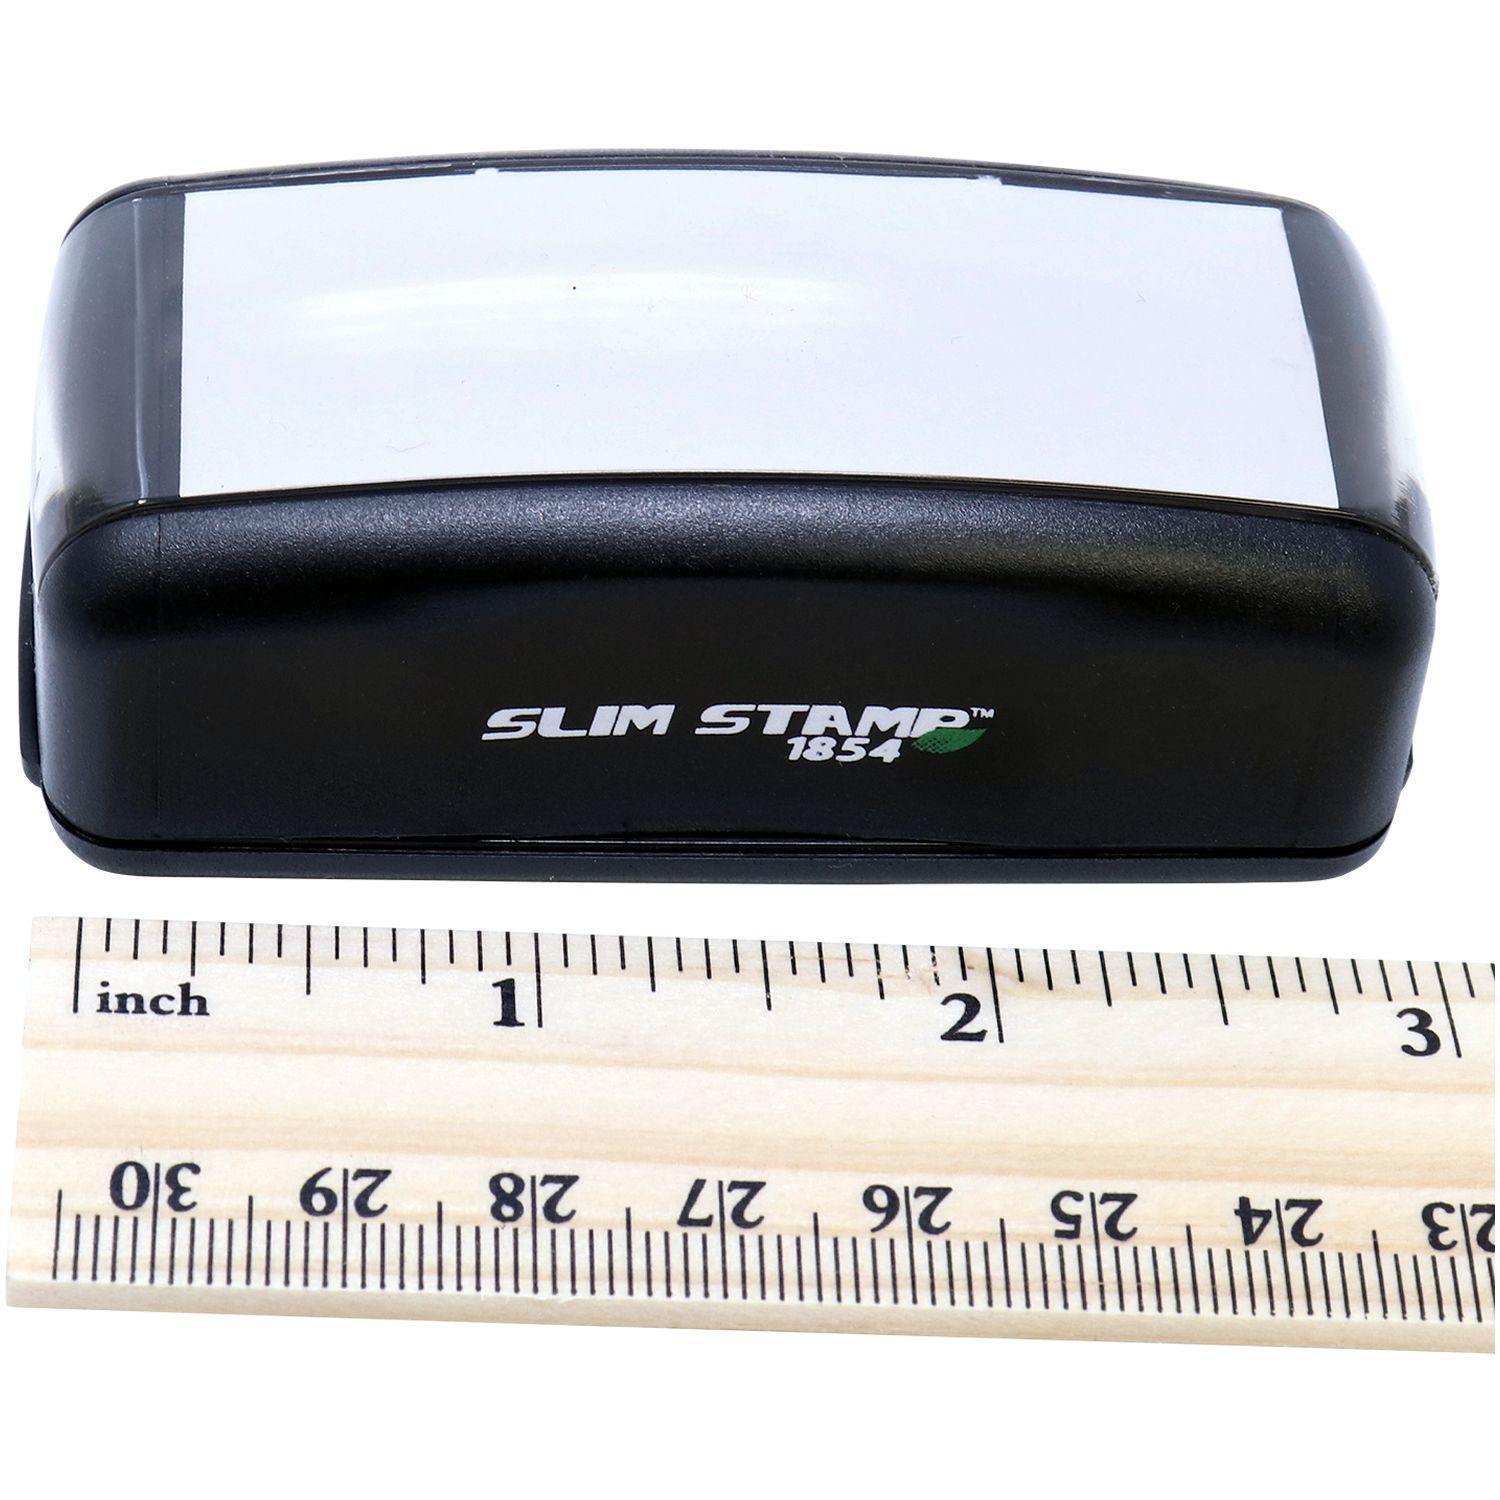 Measurement Large Pre Inked Two Thumbs Up Stamp with Ruler